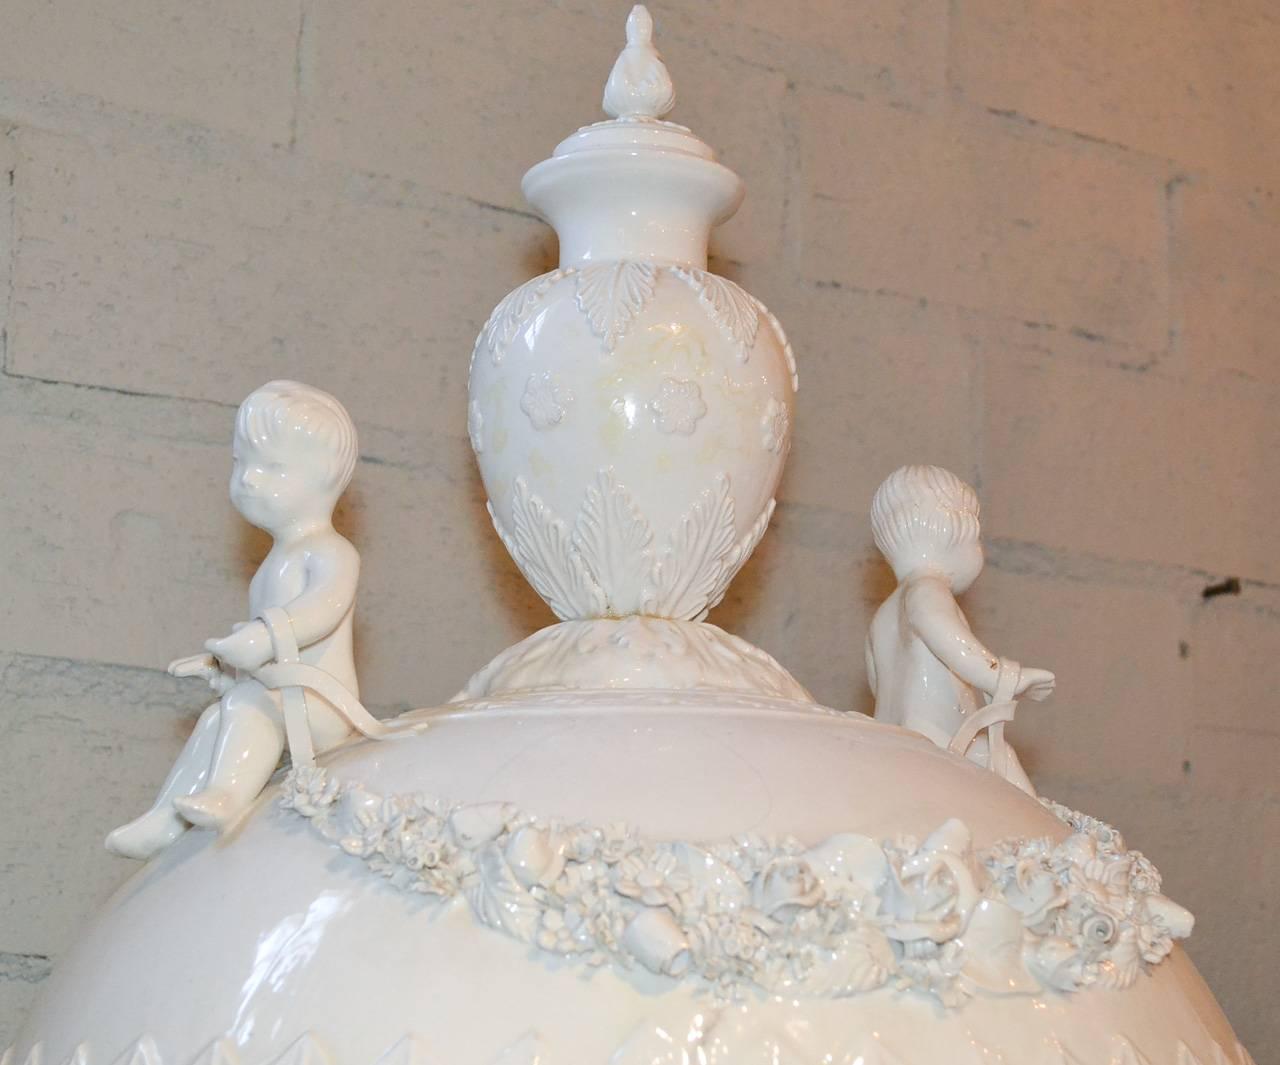 Stunning pair of large Italian glazed porcelain capped urns. Having beautifully intricate floral swag detailing, charming putti adornments, and wonderful glazed patina. Beyond chic for numerous designs!